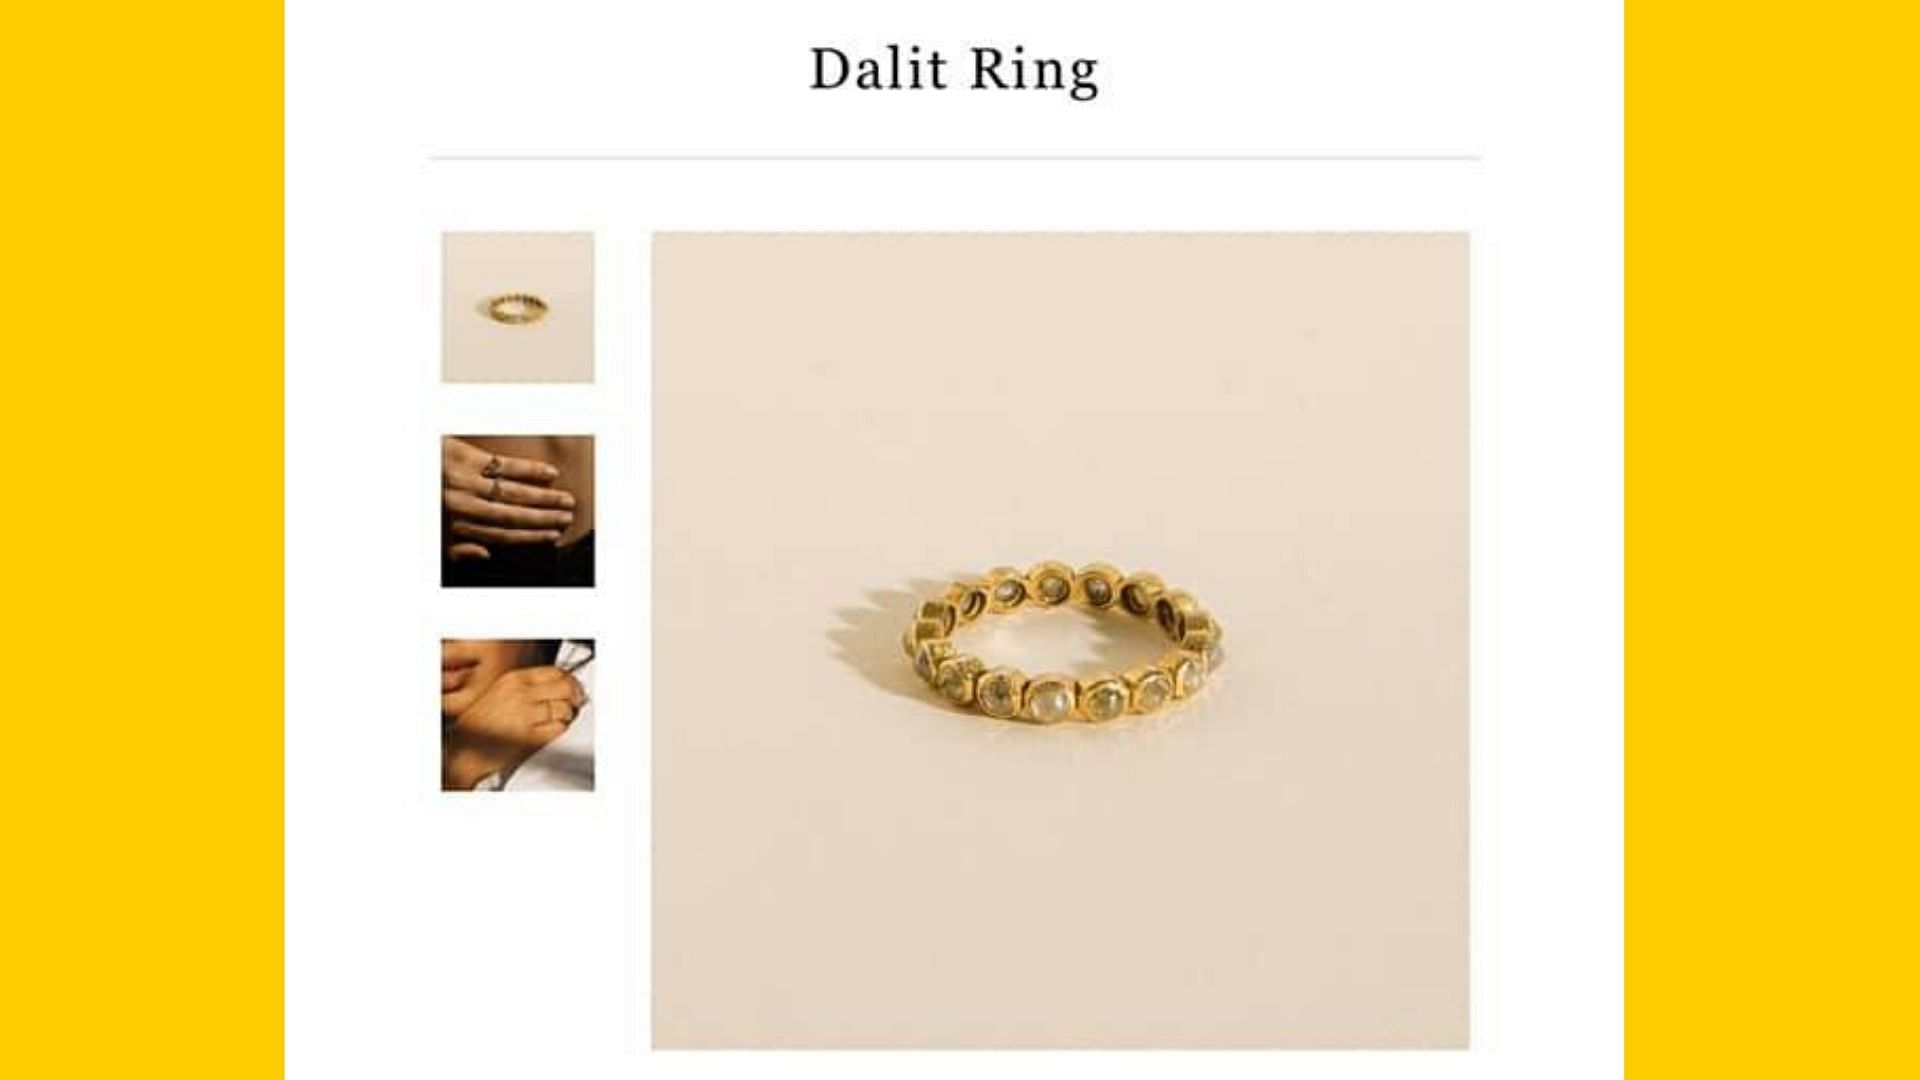 The ‘Dalit rings’ were priced at 2,000 USD.